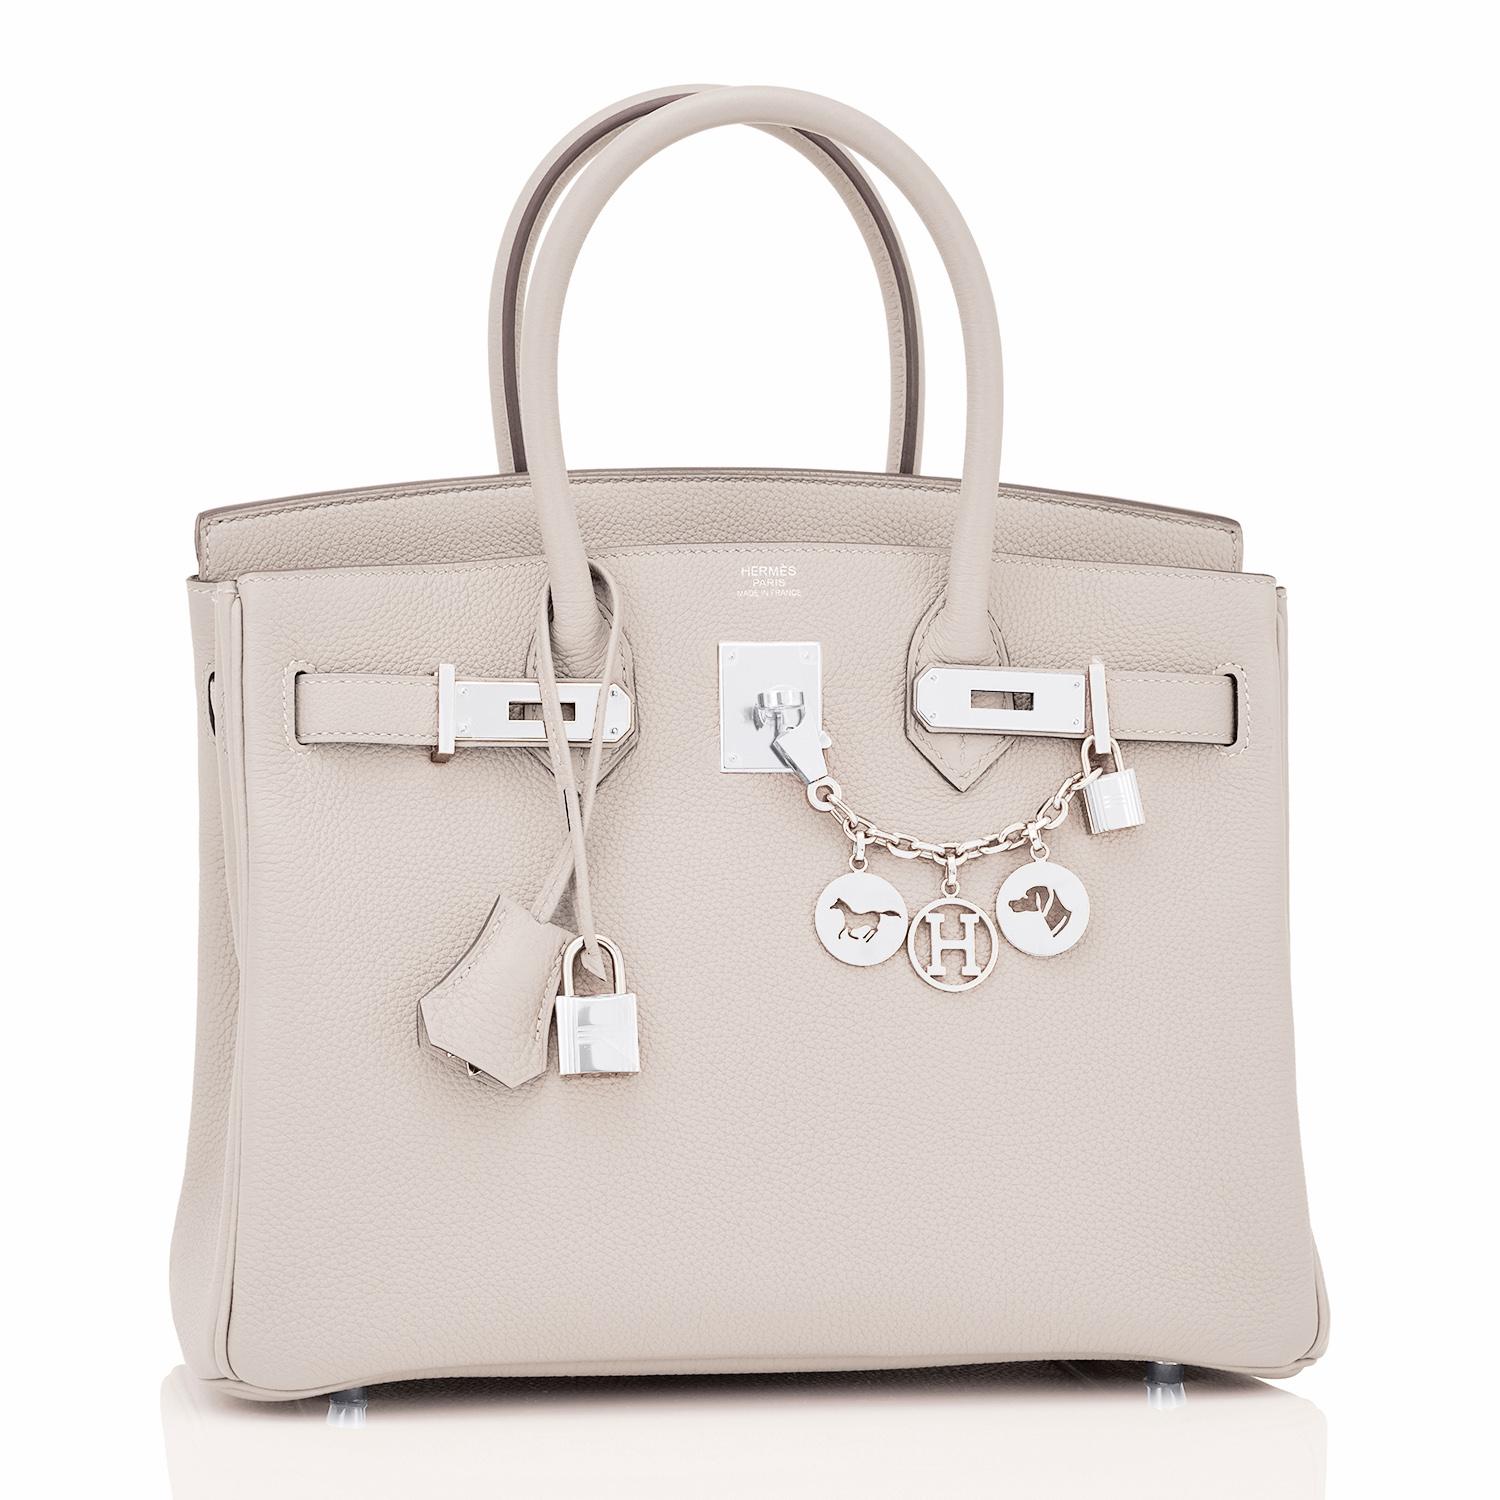 Hermes Birkin 30cm Craie Off White Togo Palladium Hardware Z Stamp, 2021
Just purchased from Hermes store; bag bears new 2021 interior Z Stamp.
Brand New in Box. Store Fresh. Pristine Condition (with plastic on hardware)
Perfect gift! Comes in full